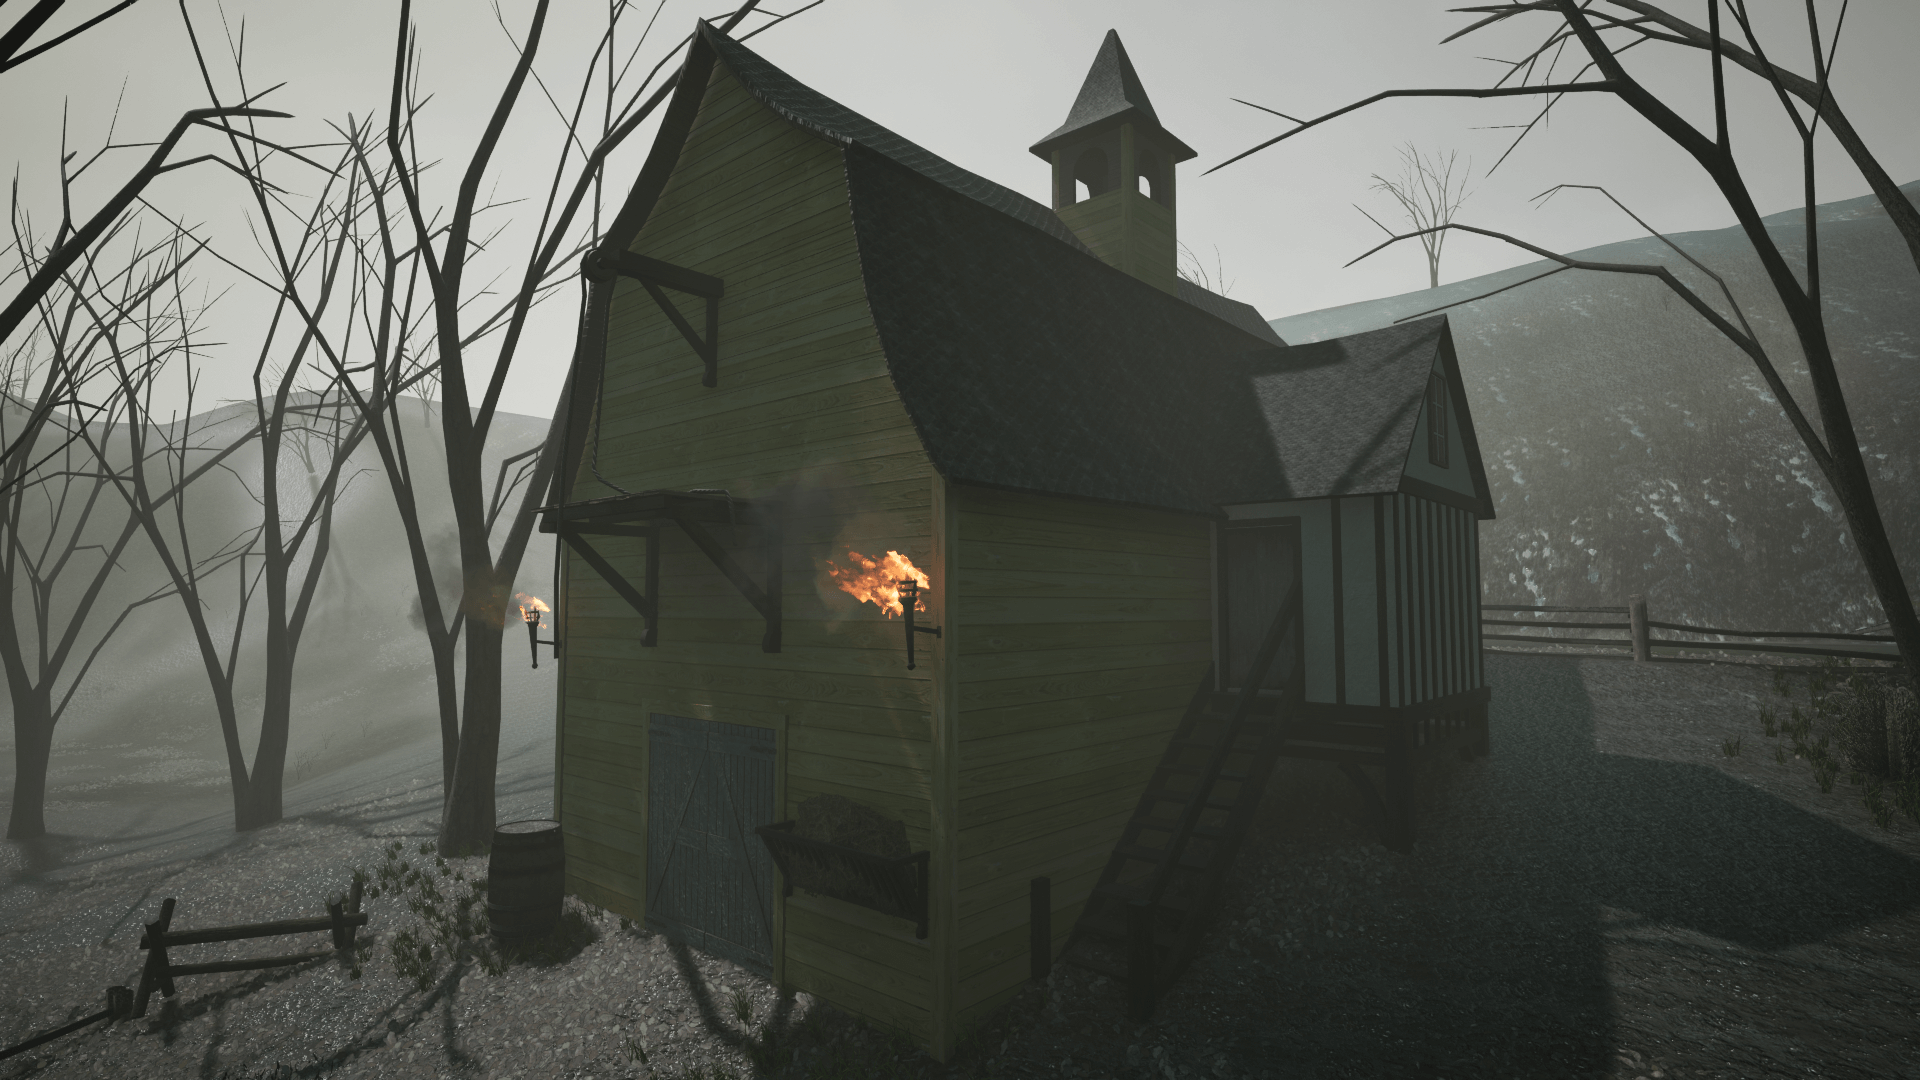 An image showing the updated version of Small Village asset pack, created with Unreal Engine